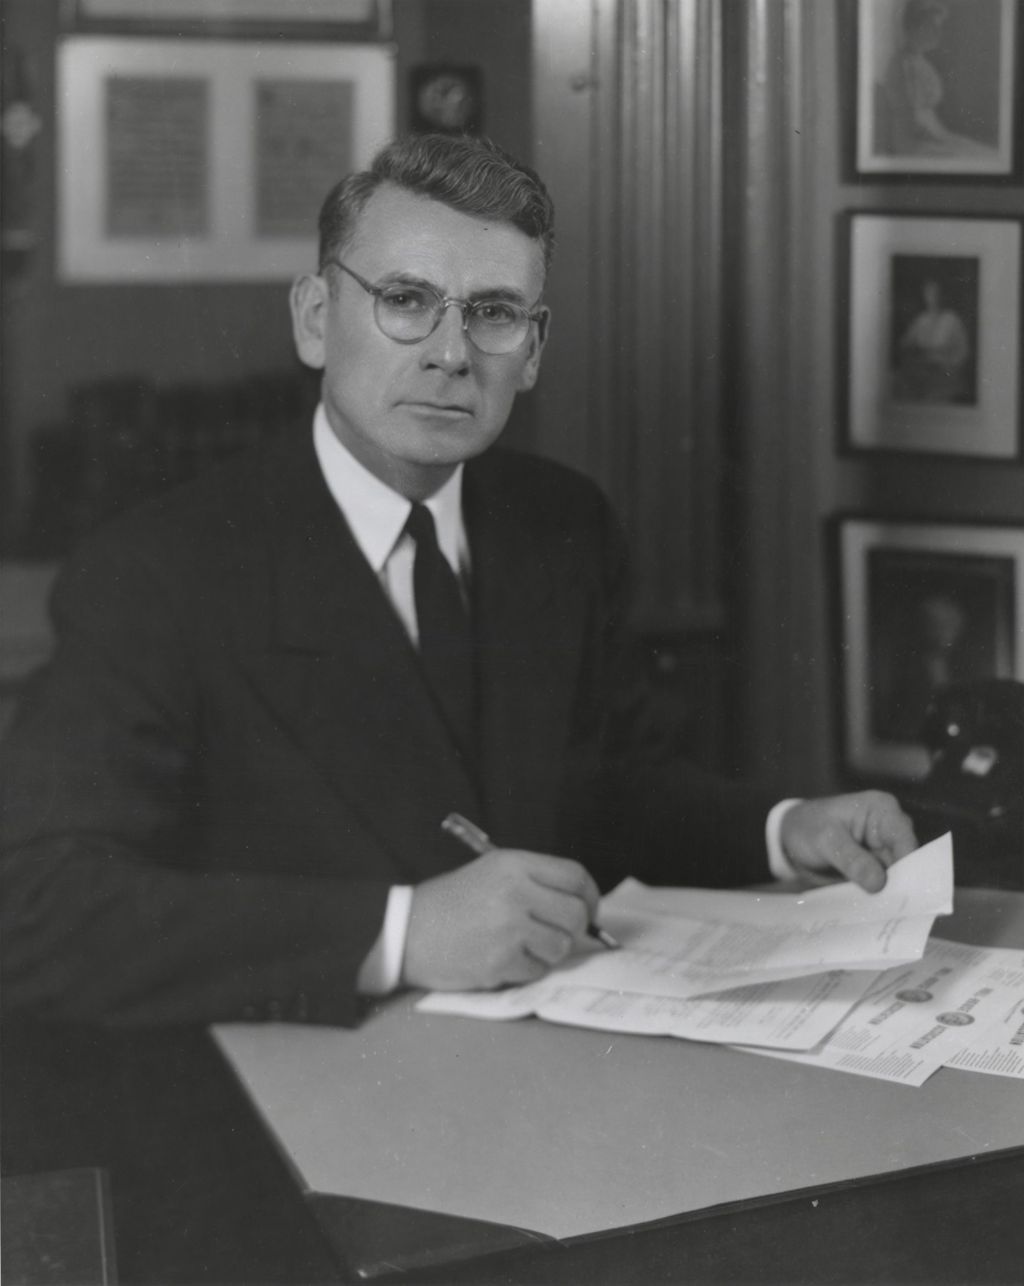 Hull-House Head Resident Russell W. Ballard signing papers at his desk